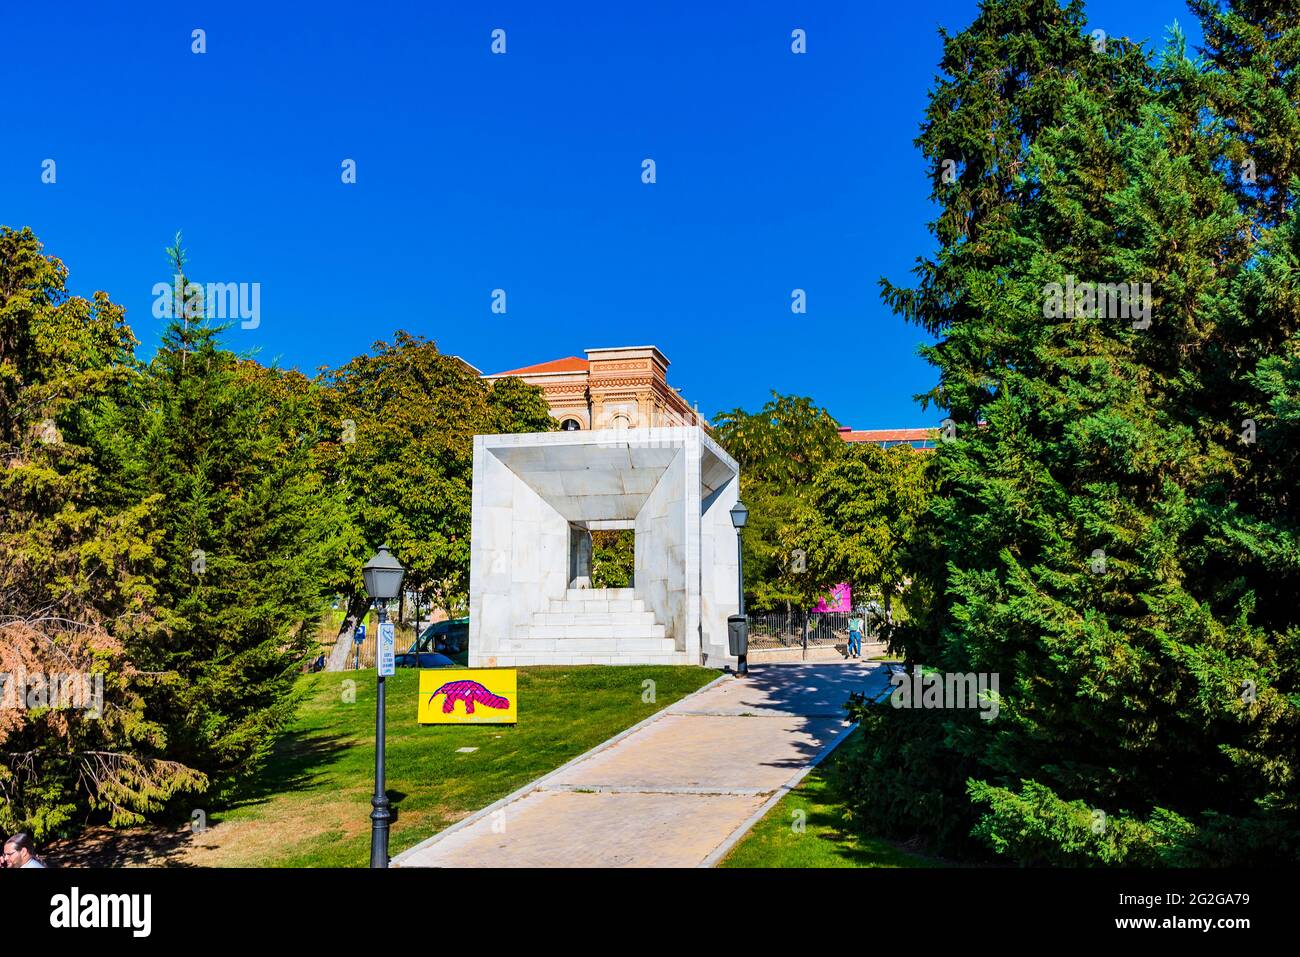 The monument to the 1978 Constitution is a sculptural work erected in Madrid in 1982 in homage to the 1978 Spanish Constitution. It is located in the Stock Photo